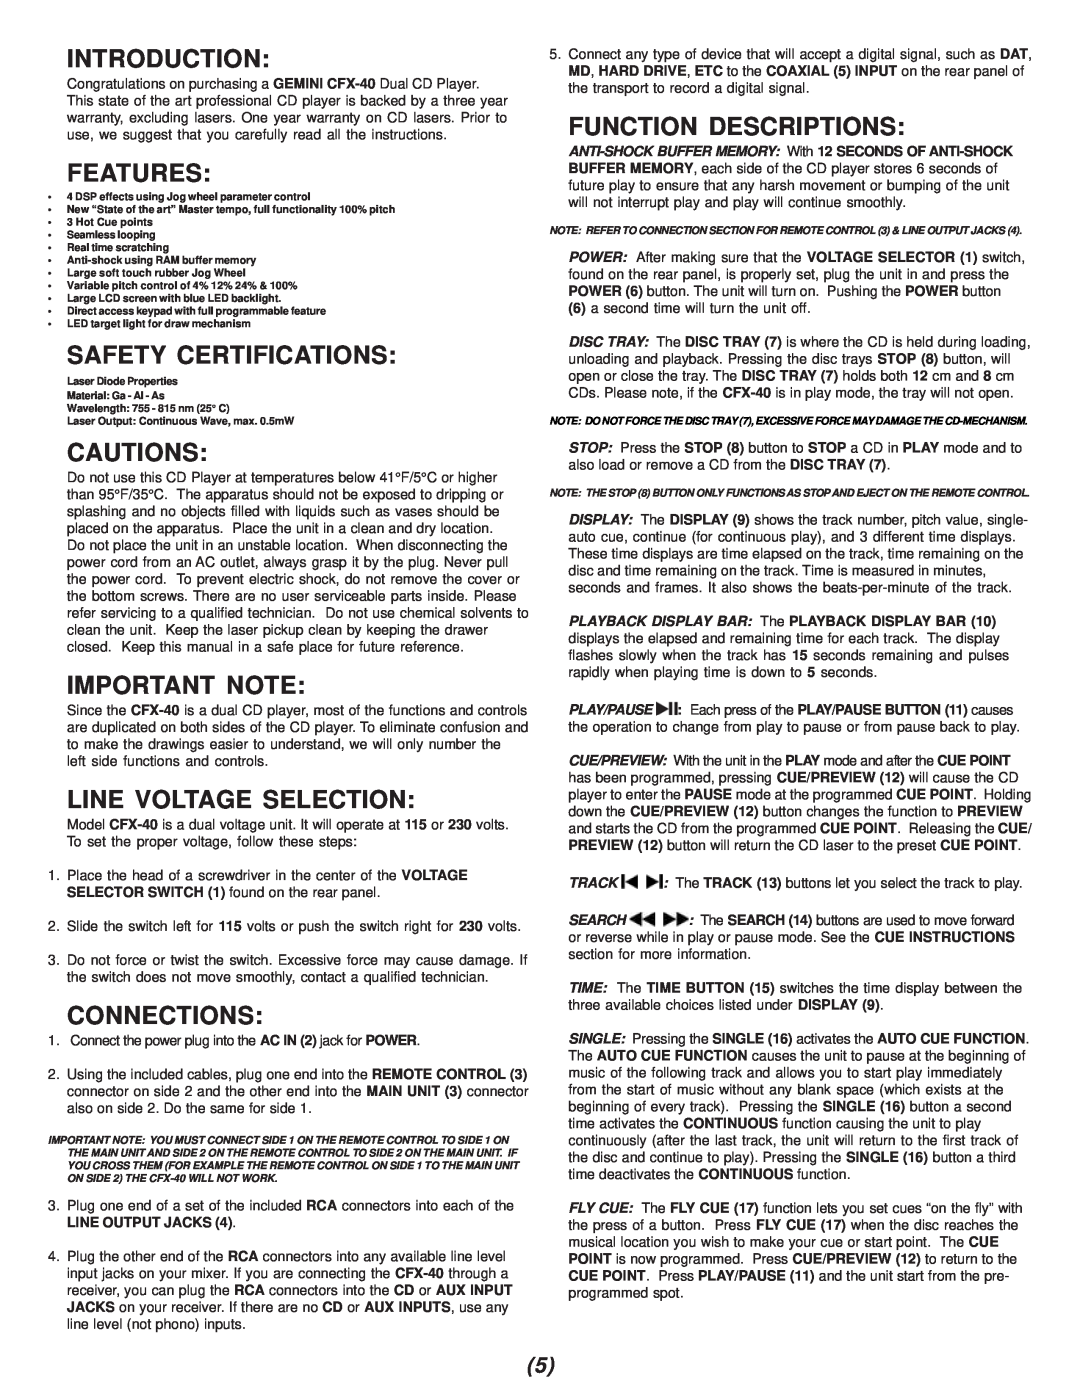 Gemini CFX-40 Introduction, Features, Safety Certifications, Function Descriptions, Cautions, Important Note, Connections 